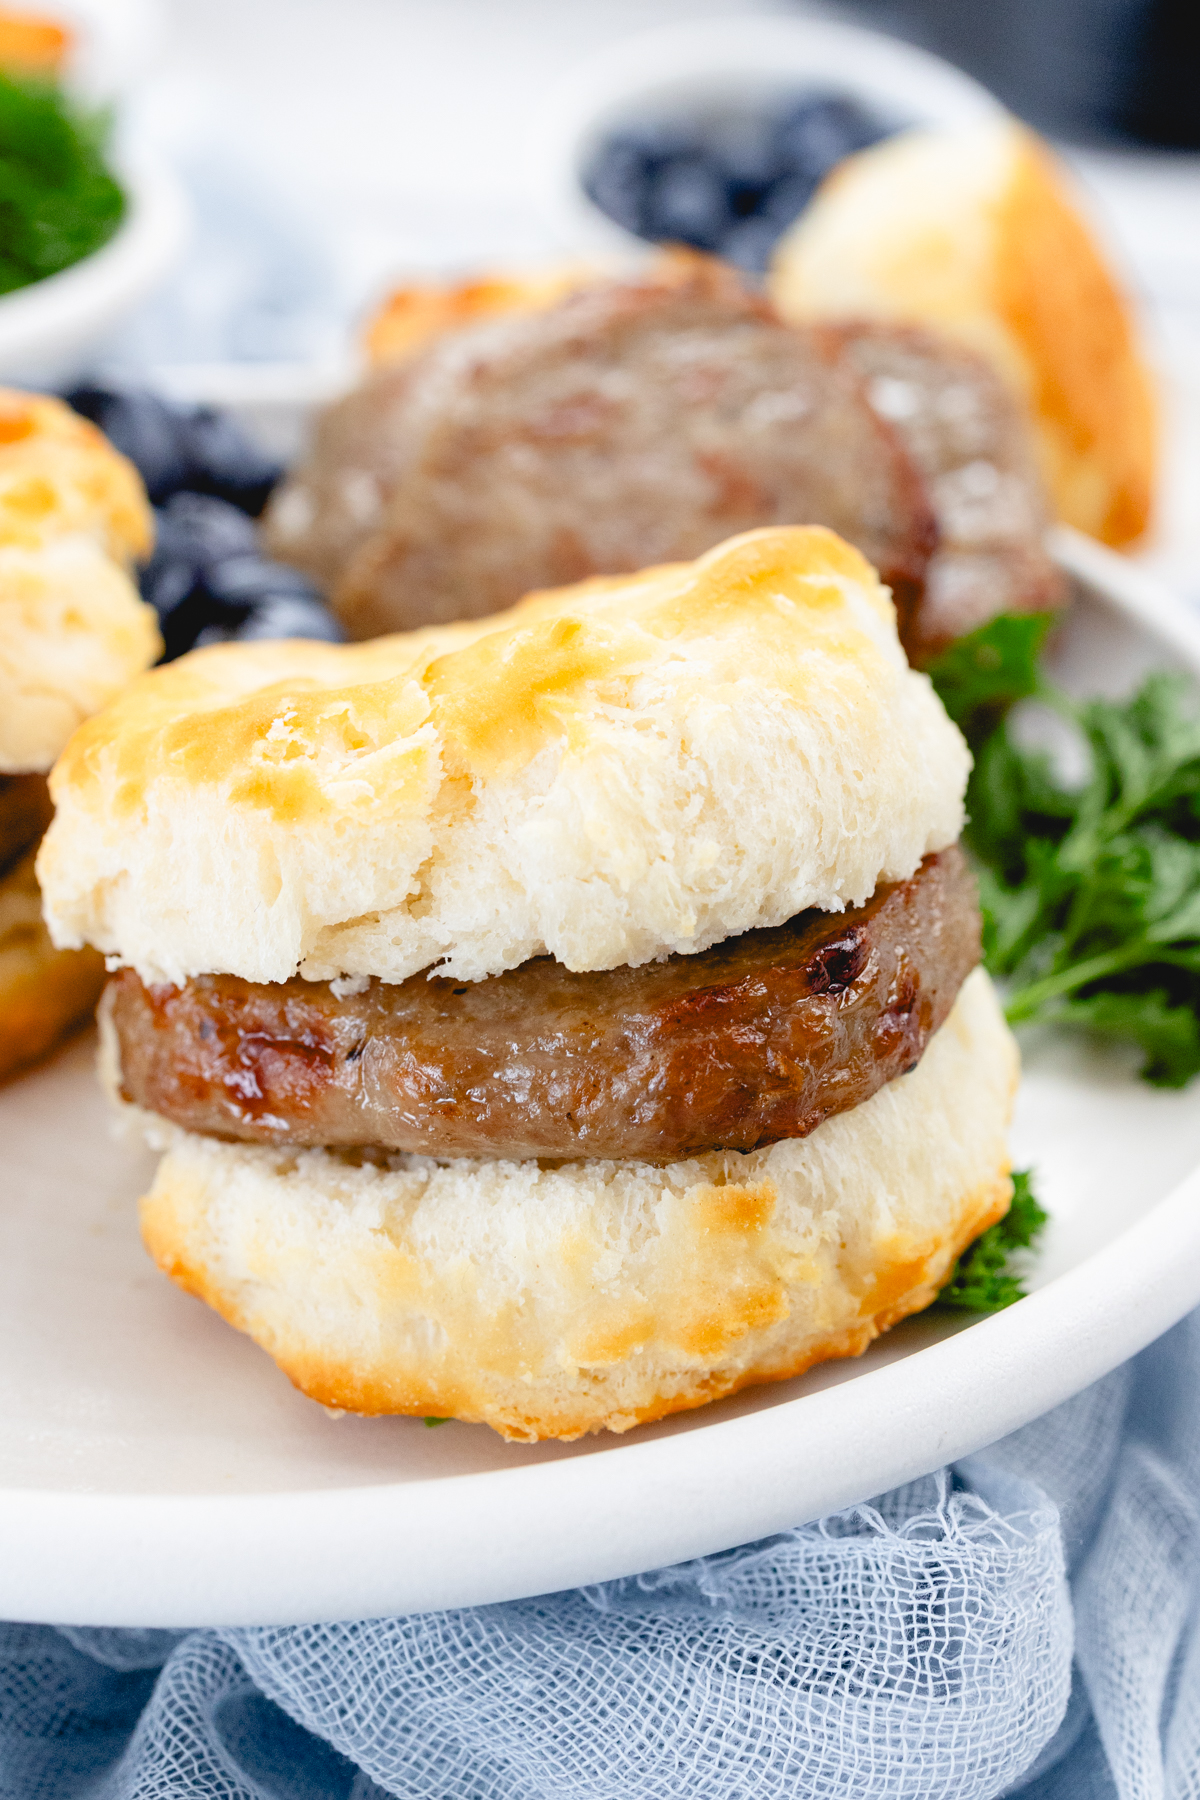 Close up of cooked sausage patties as breakfast sandwiches in sliced biscuits, on a white plate with a leafy green garnish and blueberries on the side.